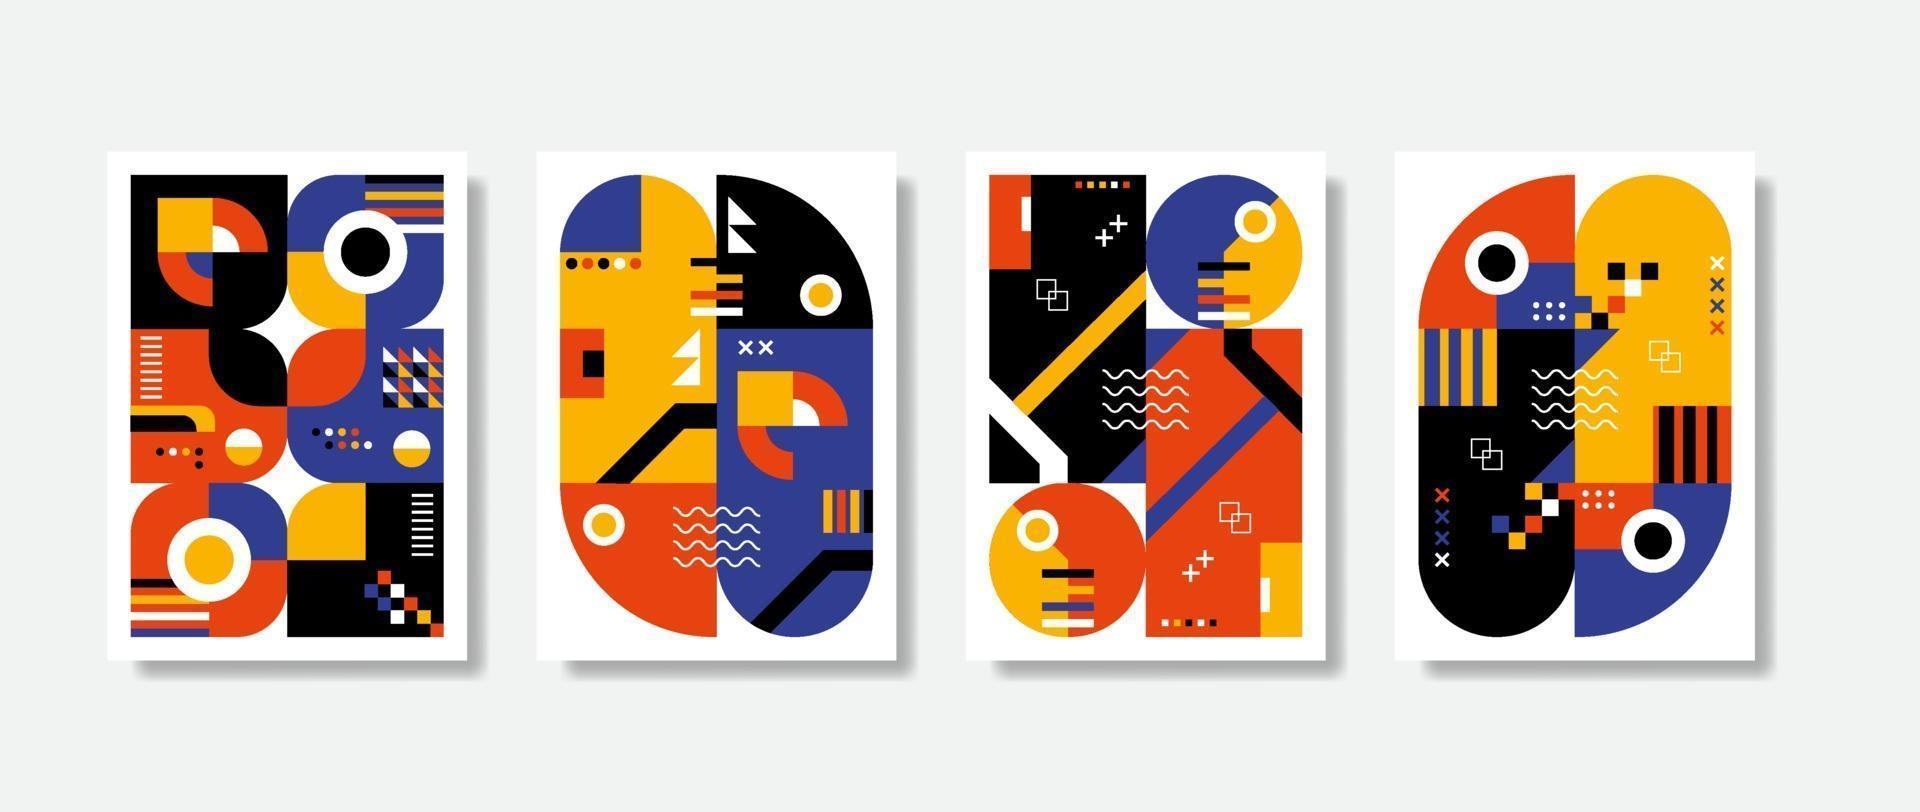 Poster postmodern inspired artwork of vector abstract symbols with bold geometric shapes, useful for web background, poster art design, magazine front page, hi-tech print, wallpaper, cover artwork.